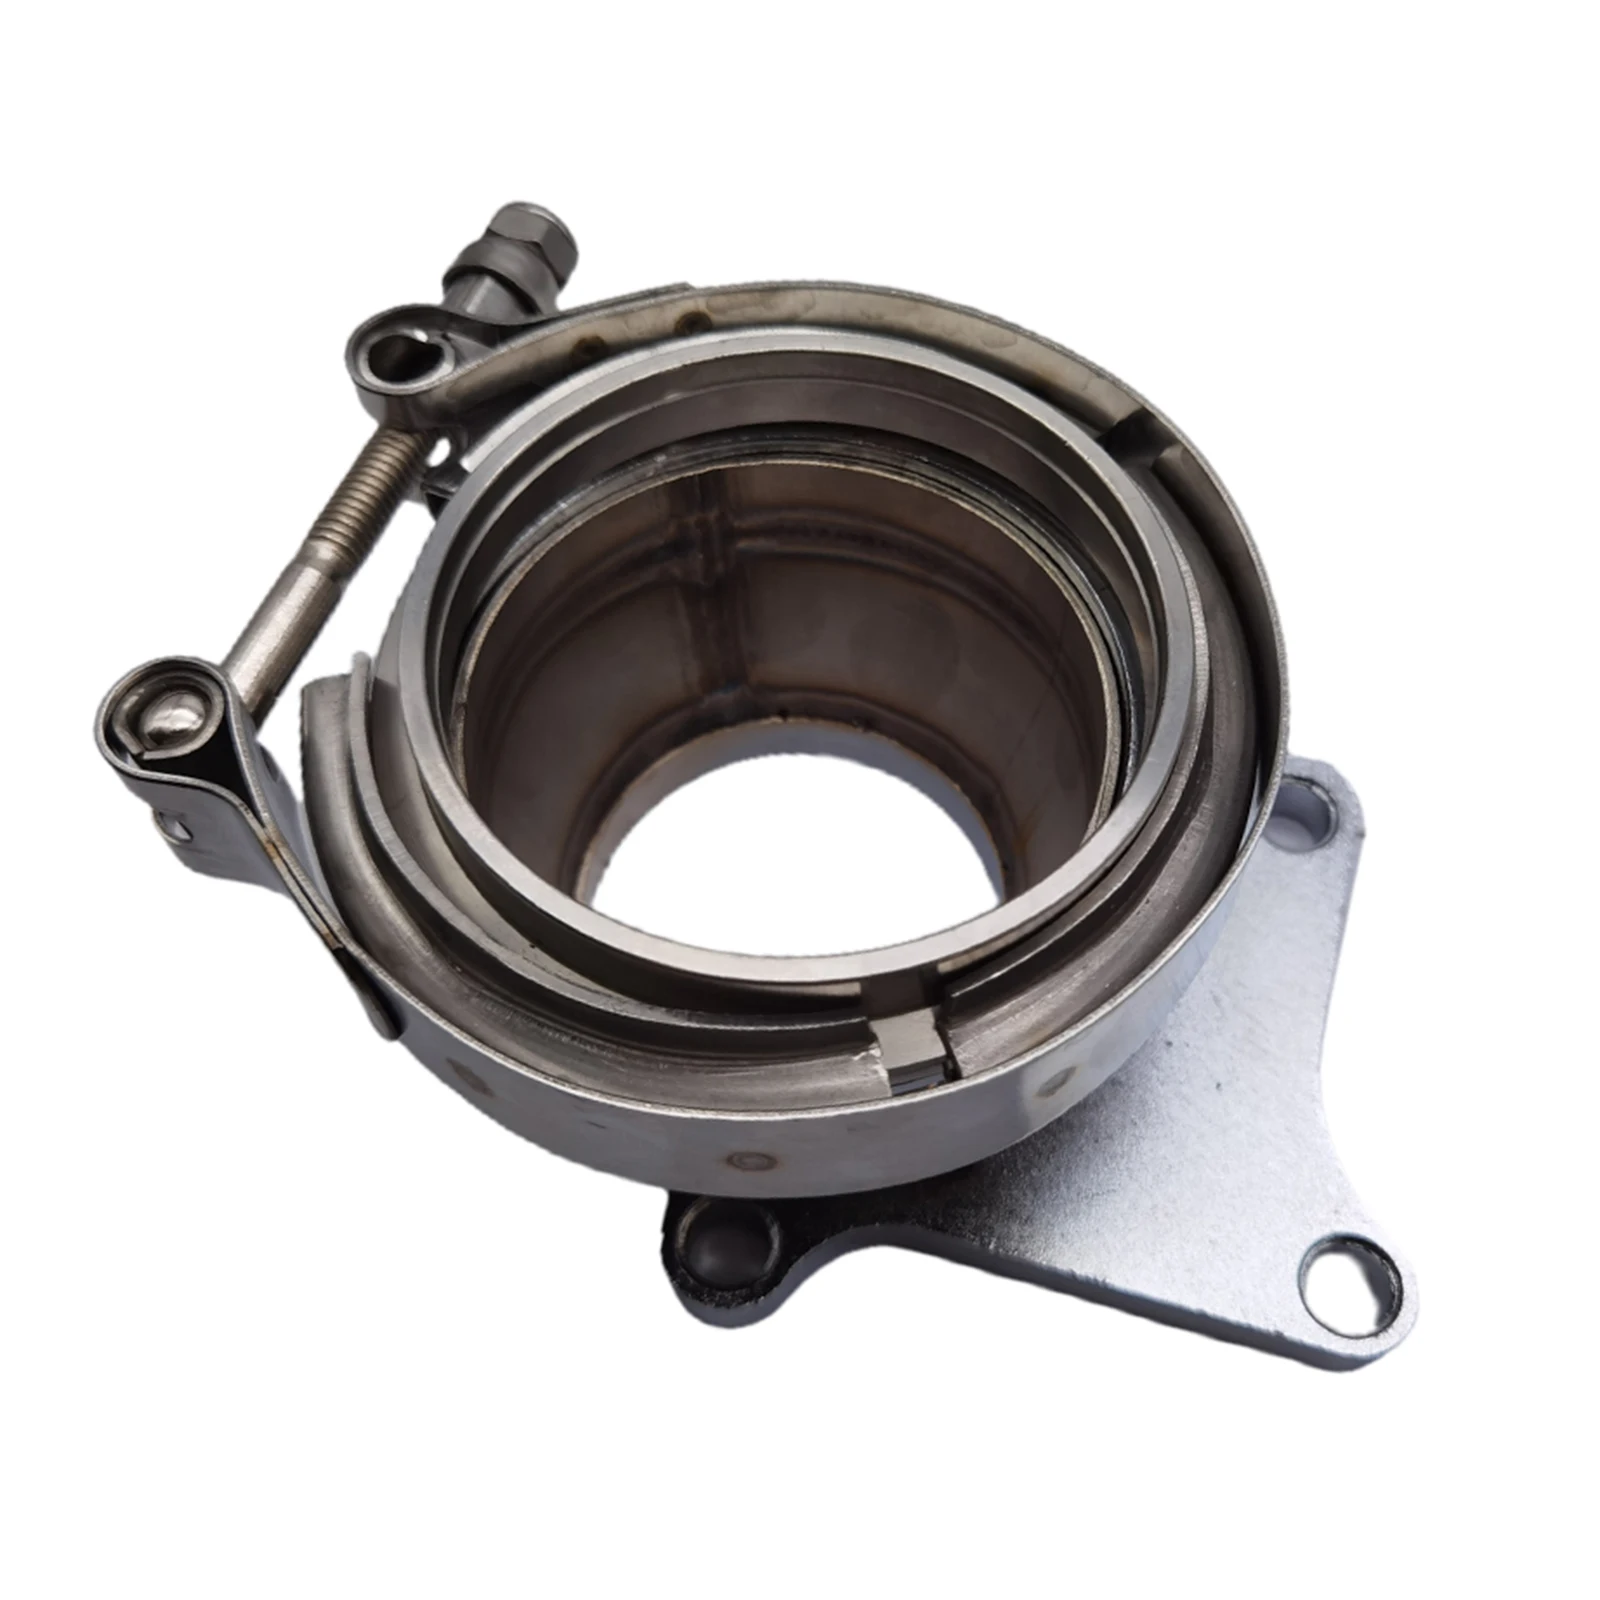 T3 T3/T4 5 Bolt Turbo Downpipe Flange to 3